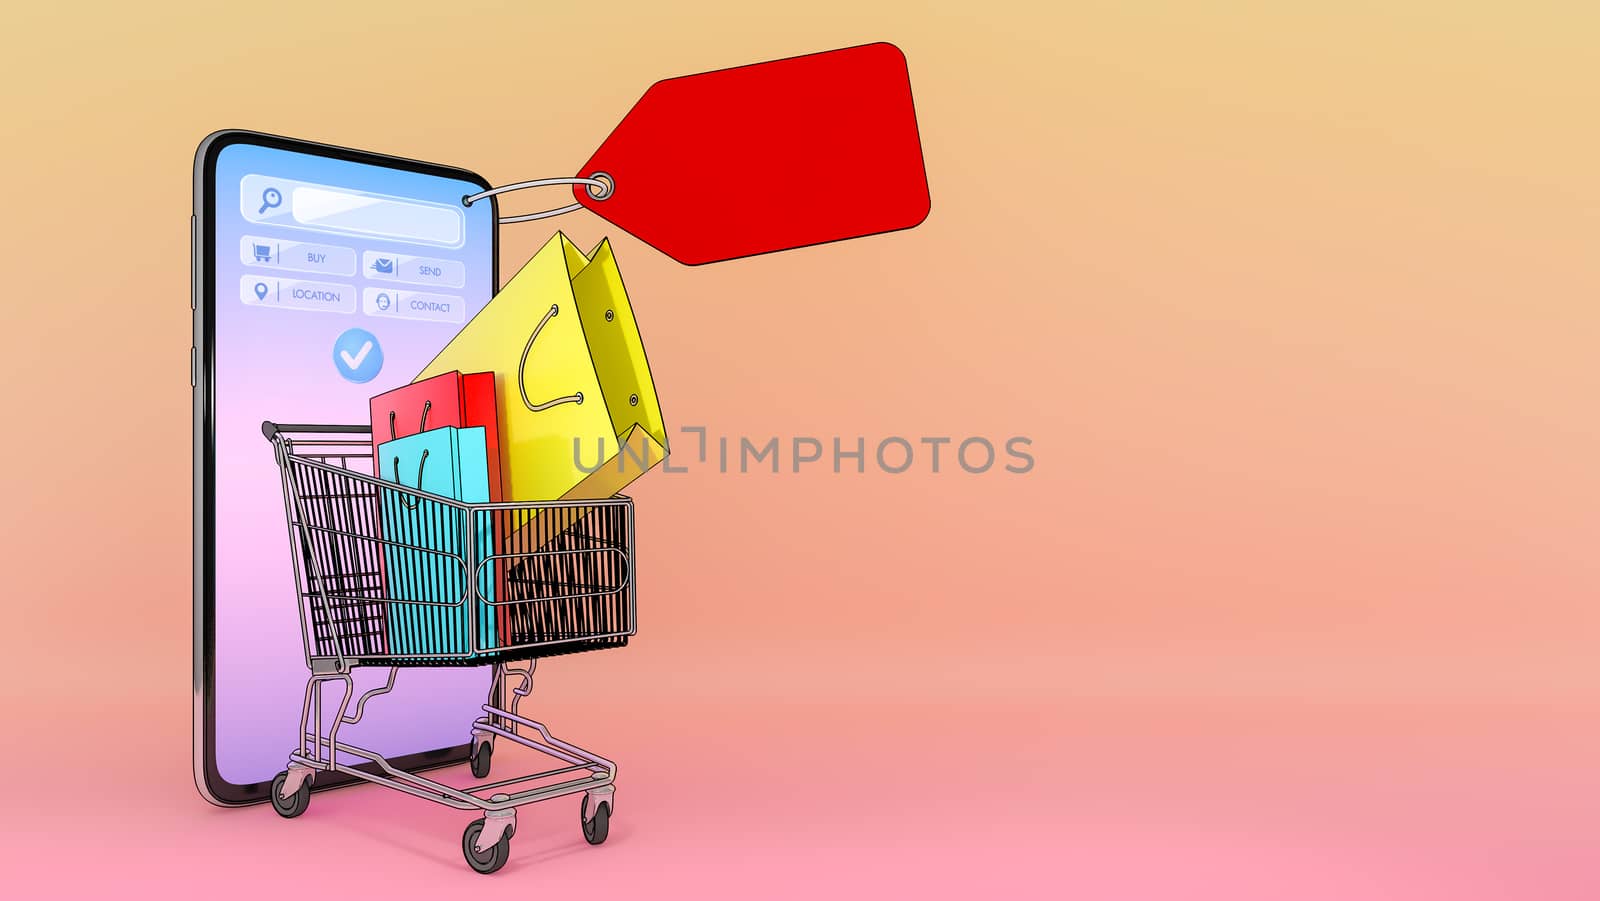 Many Shopping bag and price tag in a shopping cart appeared from smartphones screen., shopping online or shopaholic concept.,3d illustration with object clipping path. by anotestocker